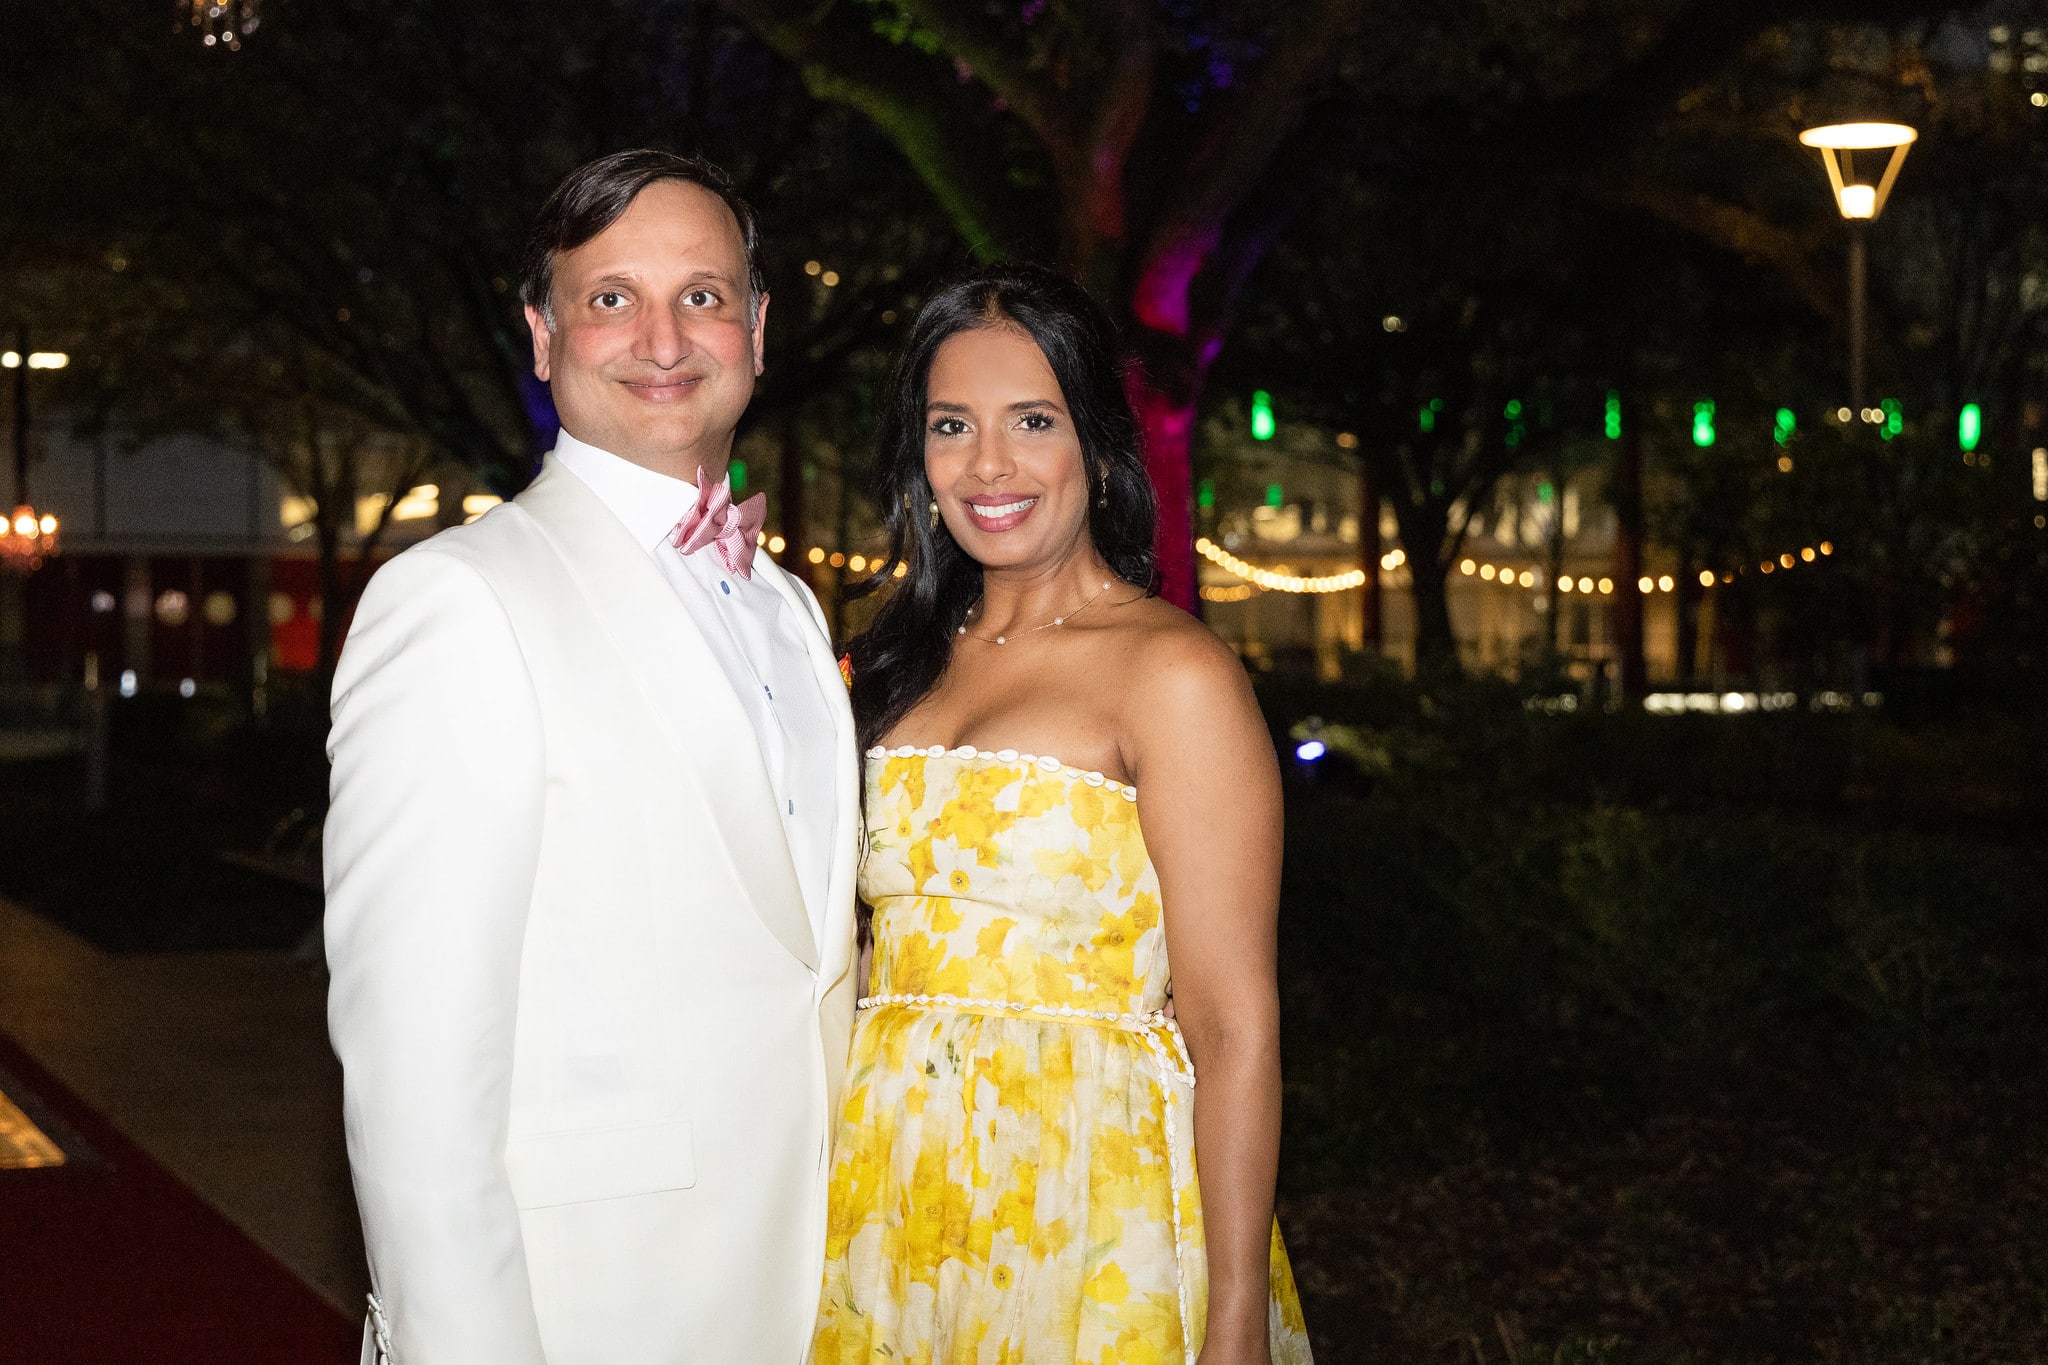 From L-R: K Cody Patel, Kusum Patel  Gala on the Green® at Discovery Green in downtown Houston. February 23, 2023. Photo: Lawrence Elizabeth Knox